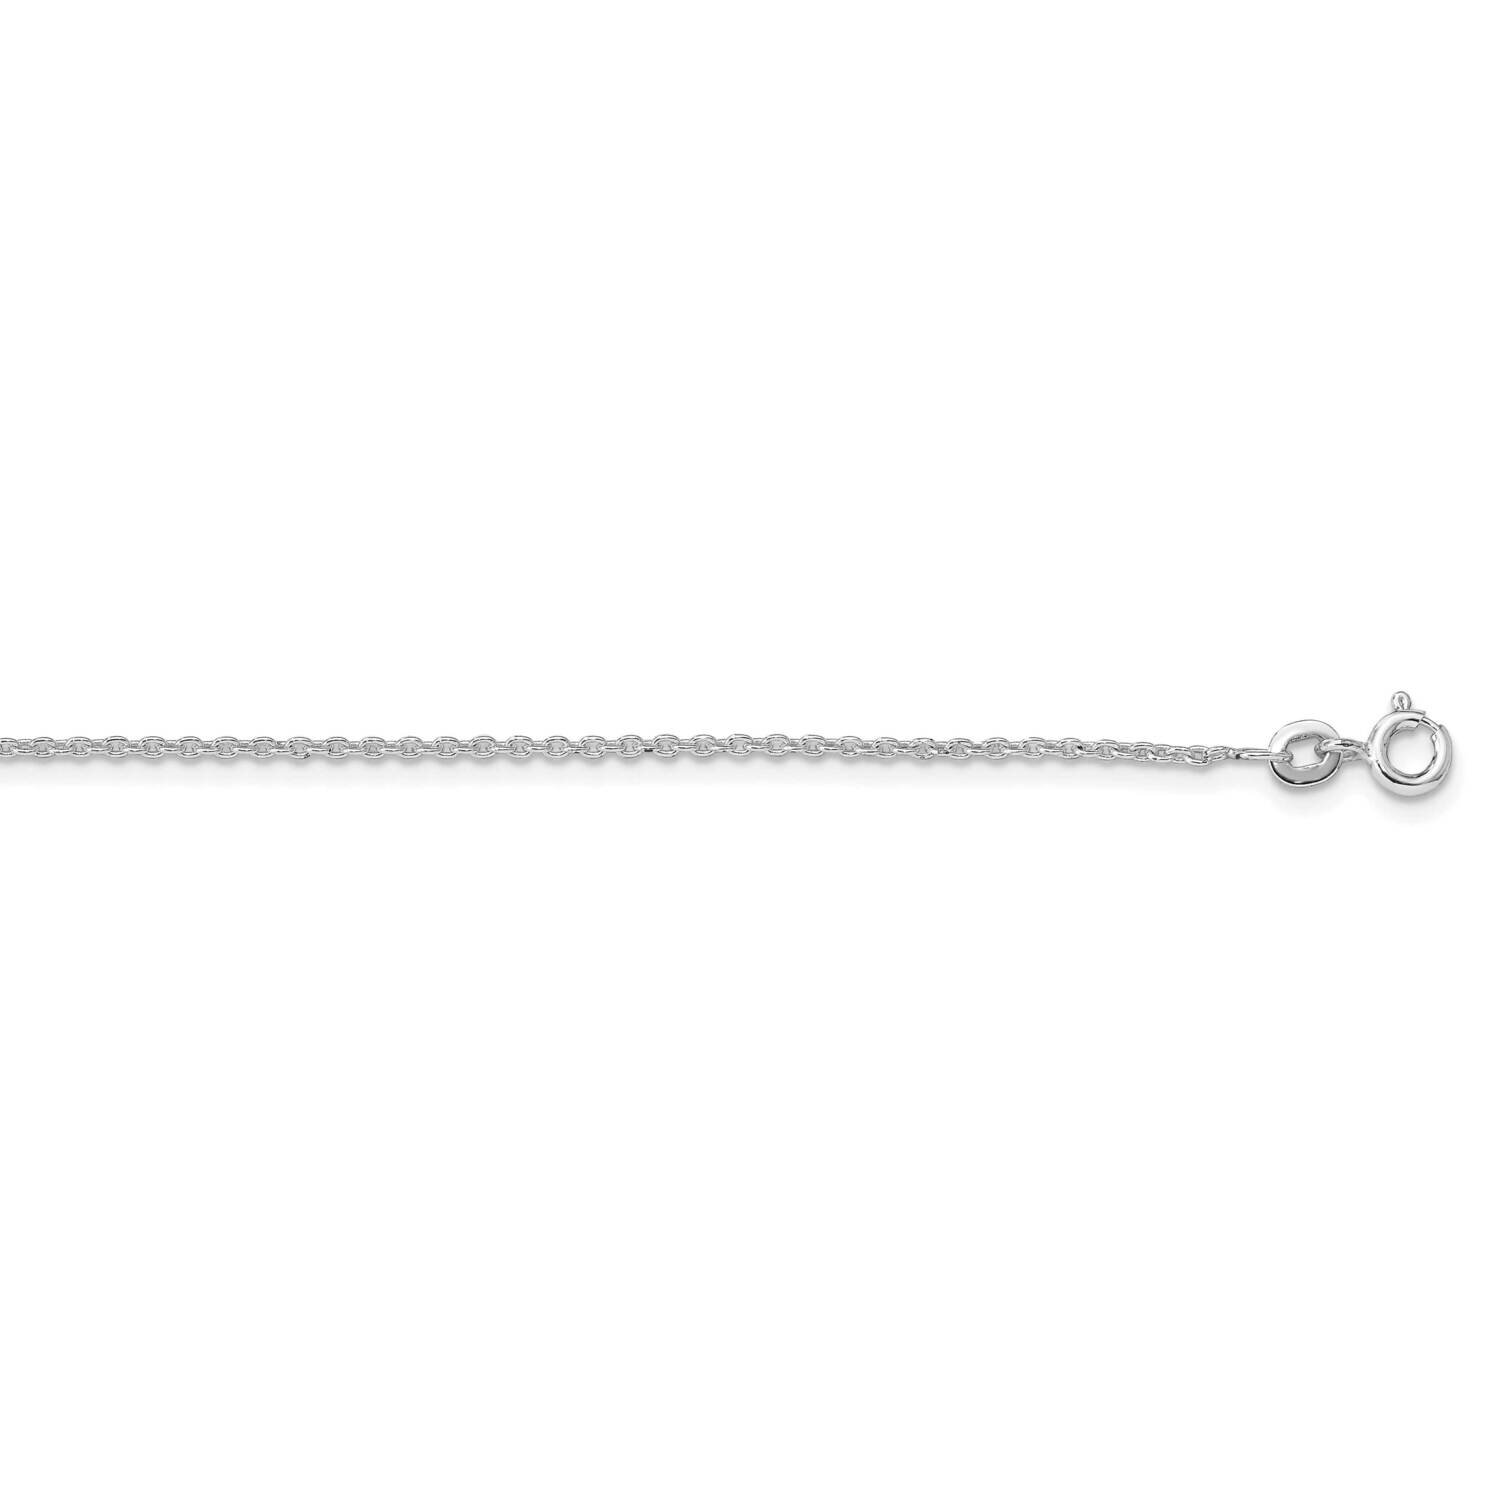 1.5mm Cable Chain with 2 Inch Extender 18 Inch Sterling Silver Rhodium-Plated QCL040RH-18